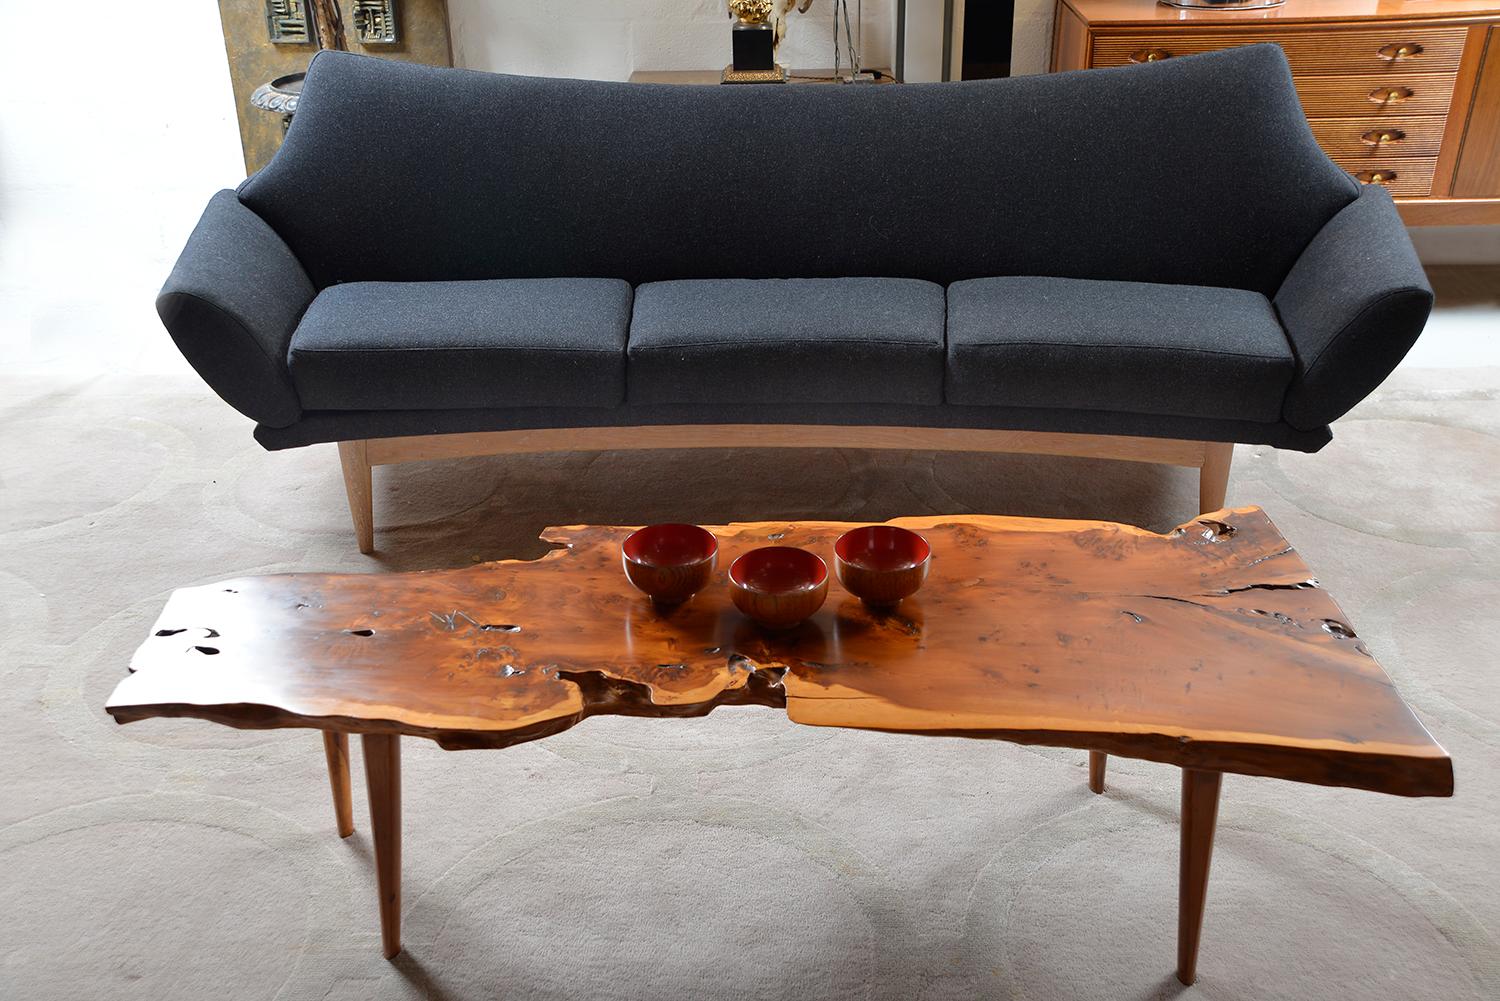 Yew Wood Live Edge Plank Coffee Table by Reynolds of Ludlow English 1950s 1960s 8